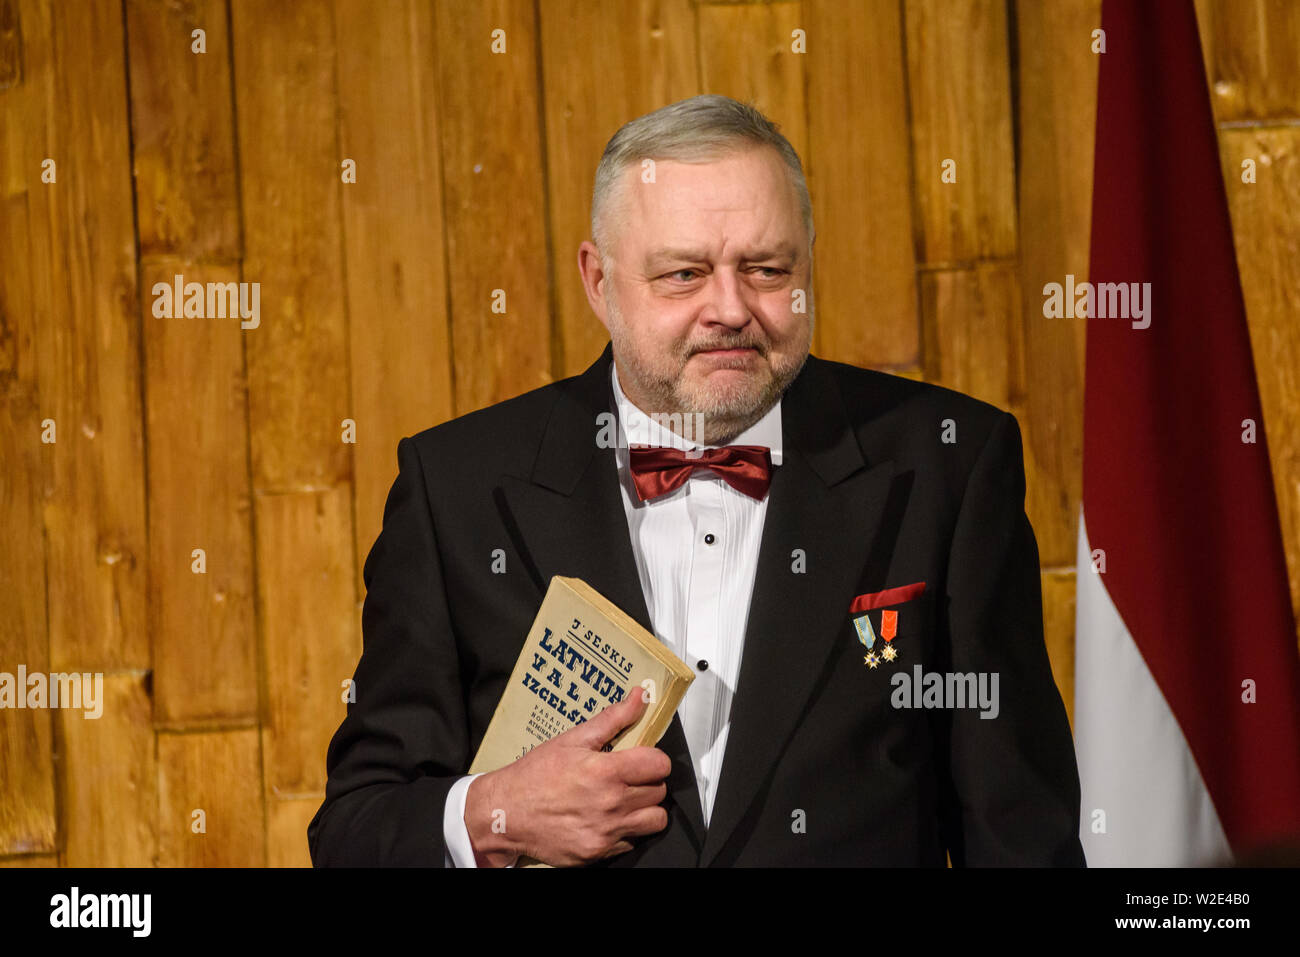 Riga, Latvia. 8th July 2019. Andris Vilks, director of Latvian National Library (LNB) with received book from President, during Reception in honour of the inauguration of President of Latvia Mr Egils Levits accompanied by First Lady of Latvia Mrs Andra Levite. Credit: Gints Ivuskans/Alamy Live News Stock Photo